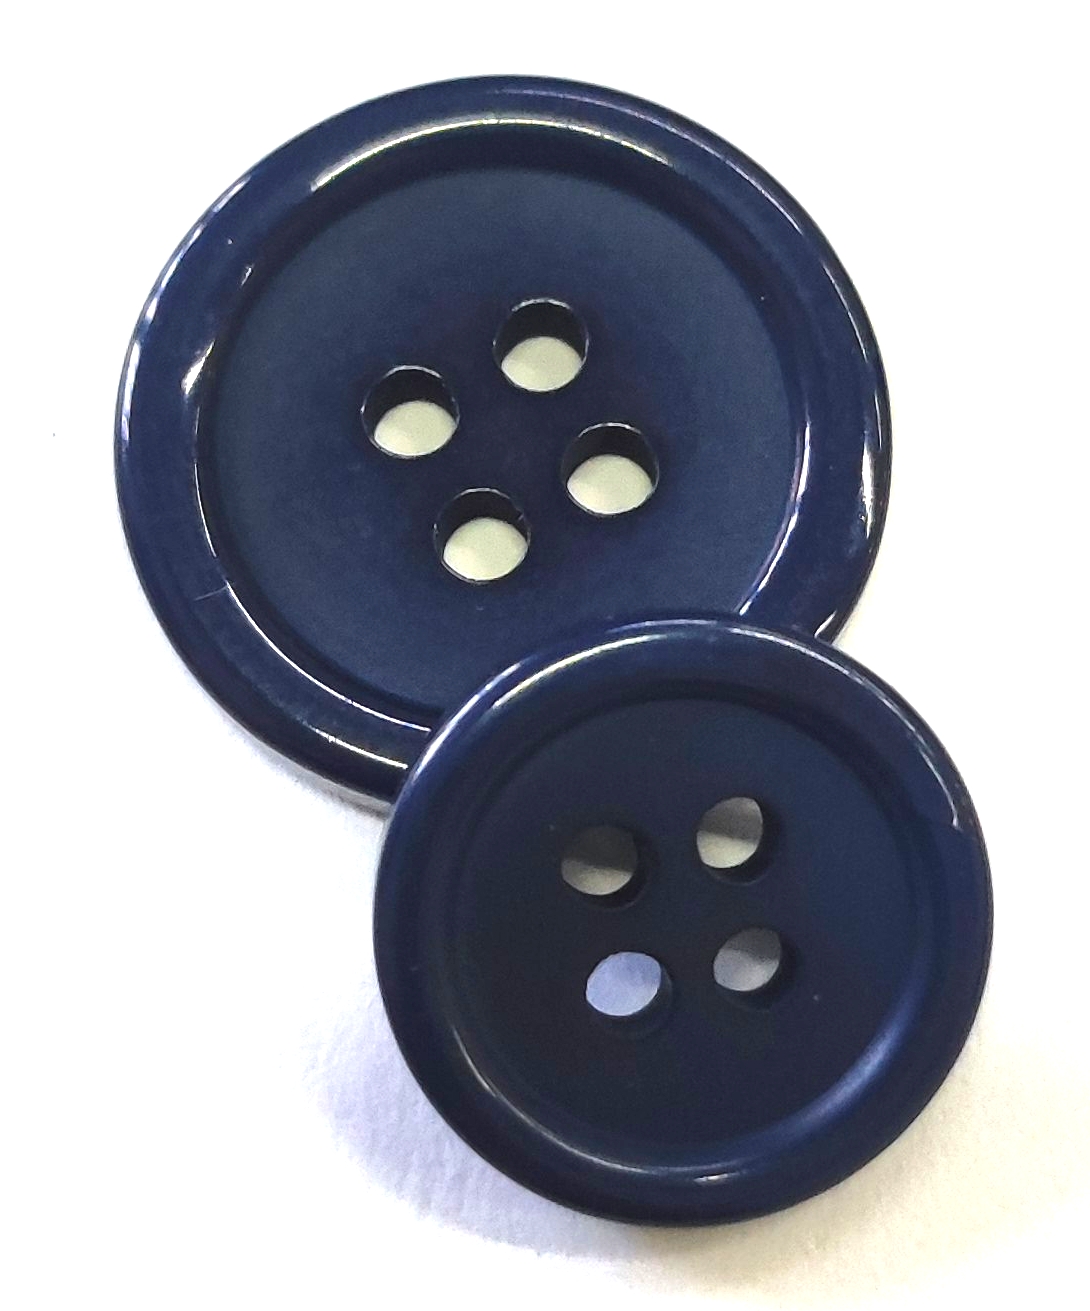 MAN BUTTONS 4 HOLES            POLYESTER